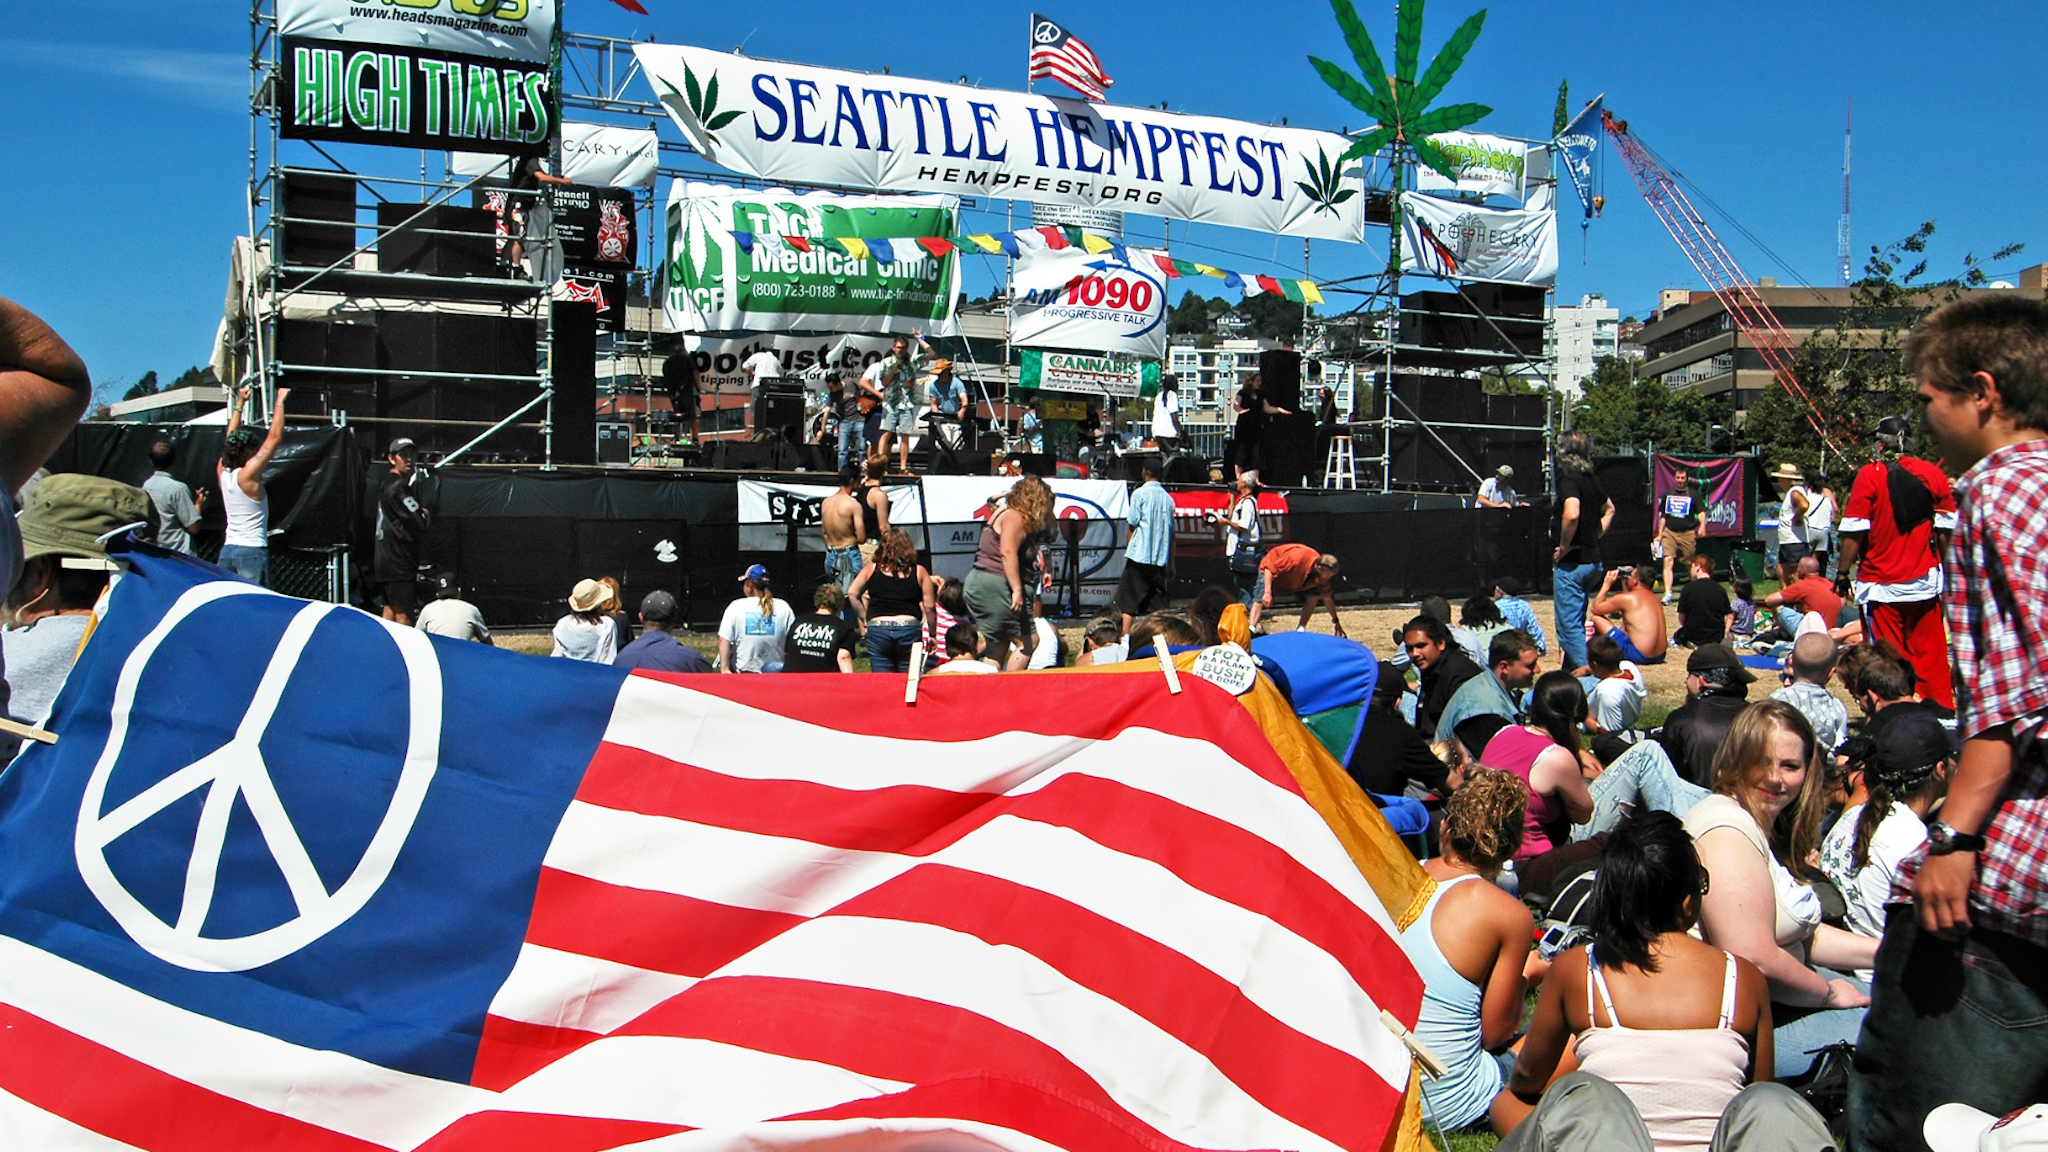 [UNVERIFIED CONTENT] Seattle HempFest in August 2006, a 1960s-style love-in for all things hemp and marijuana at a waterfront park near downtown. Lots of people, pipes and bongs, hemp-seed brownies, hemp clothing, music and the politics of marijuana legalization -- mixed with sun and the occasional whiff of cannibis, despite the heavy police presence.